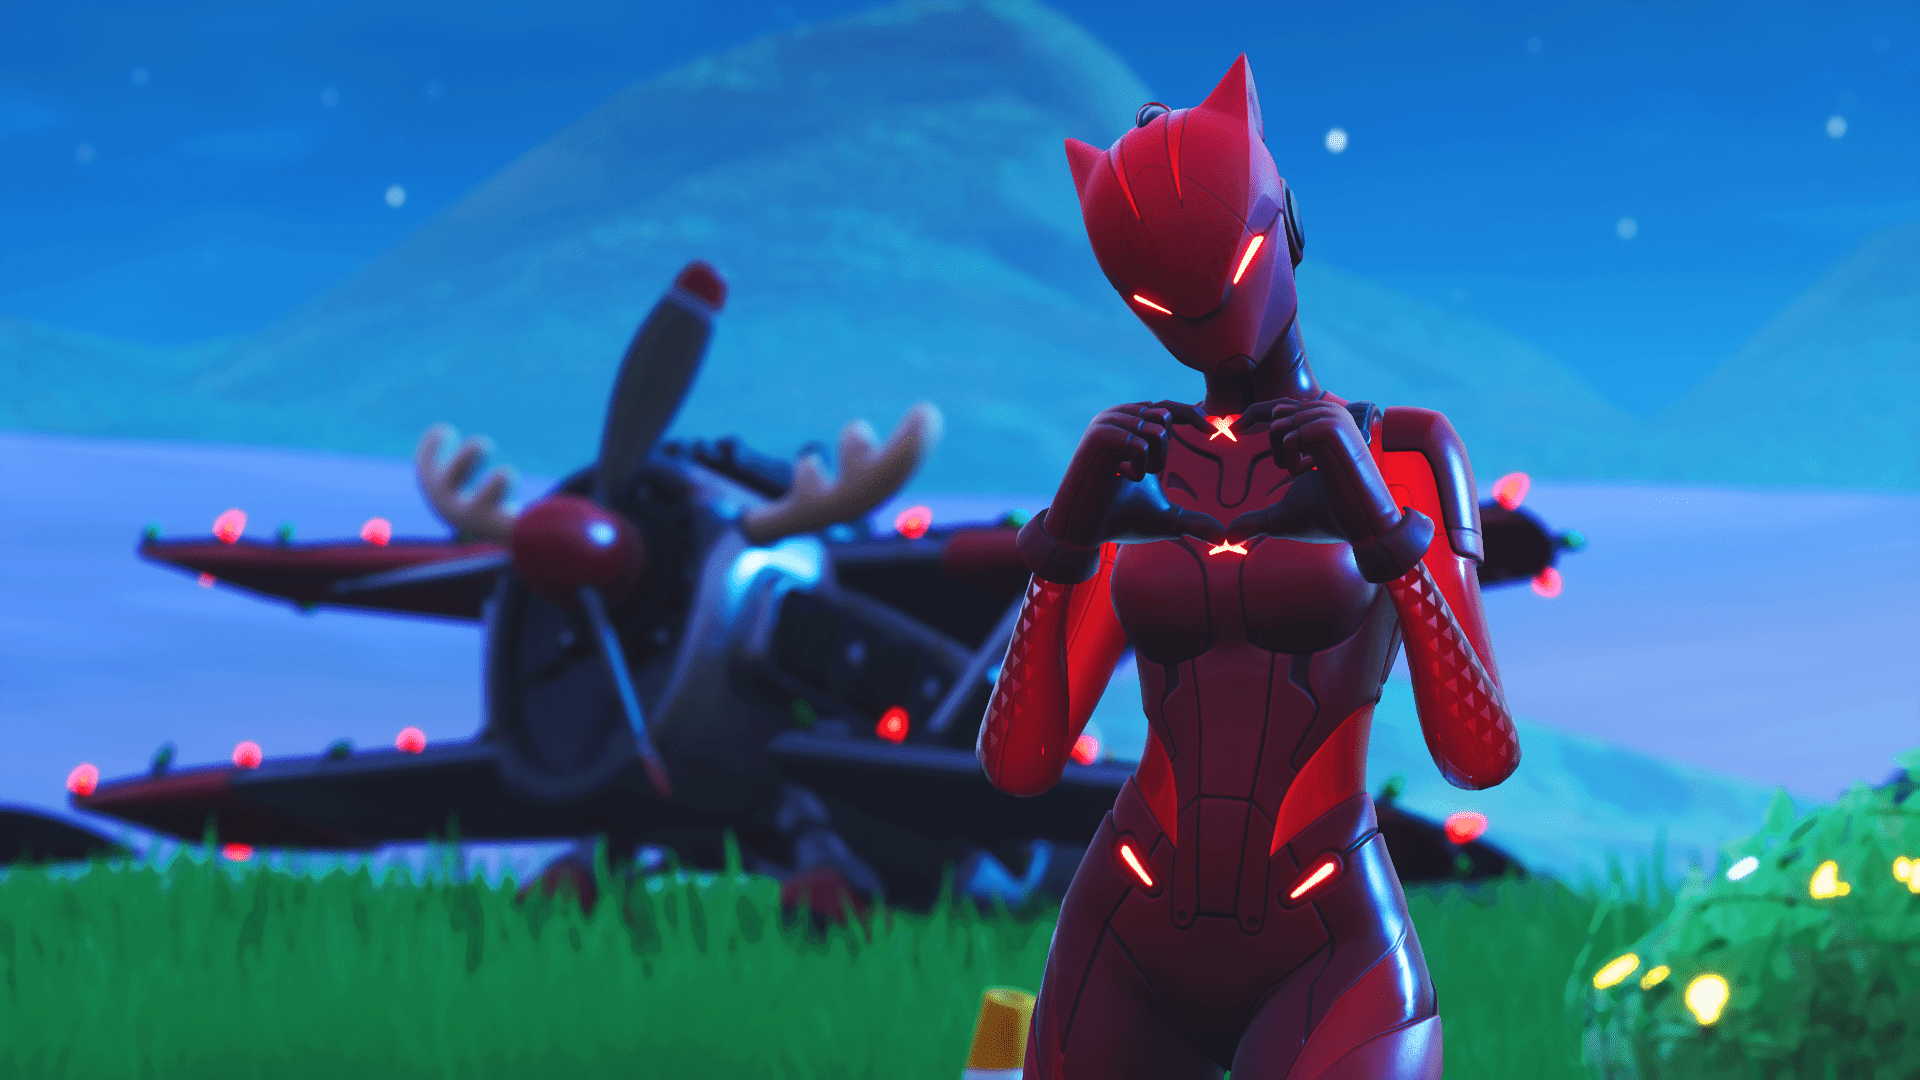 Red Fortnite character standing in front of a crashed plane - Fortnite